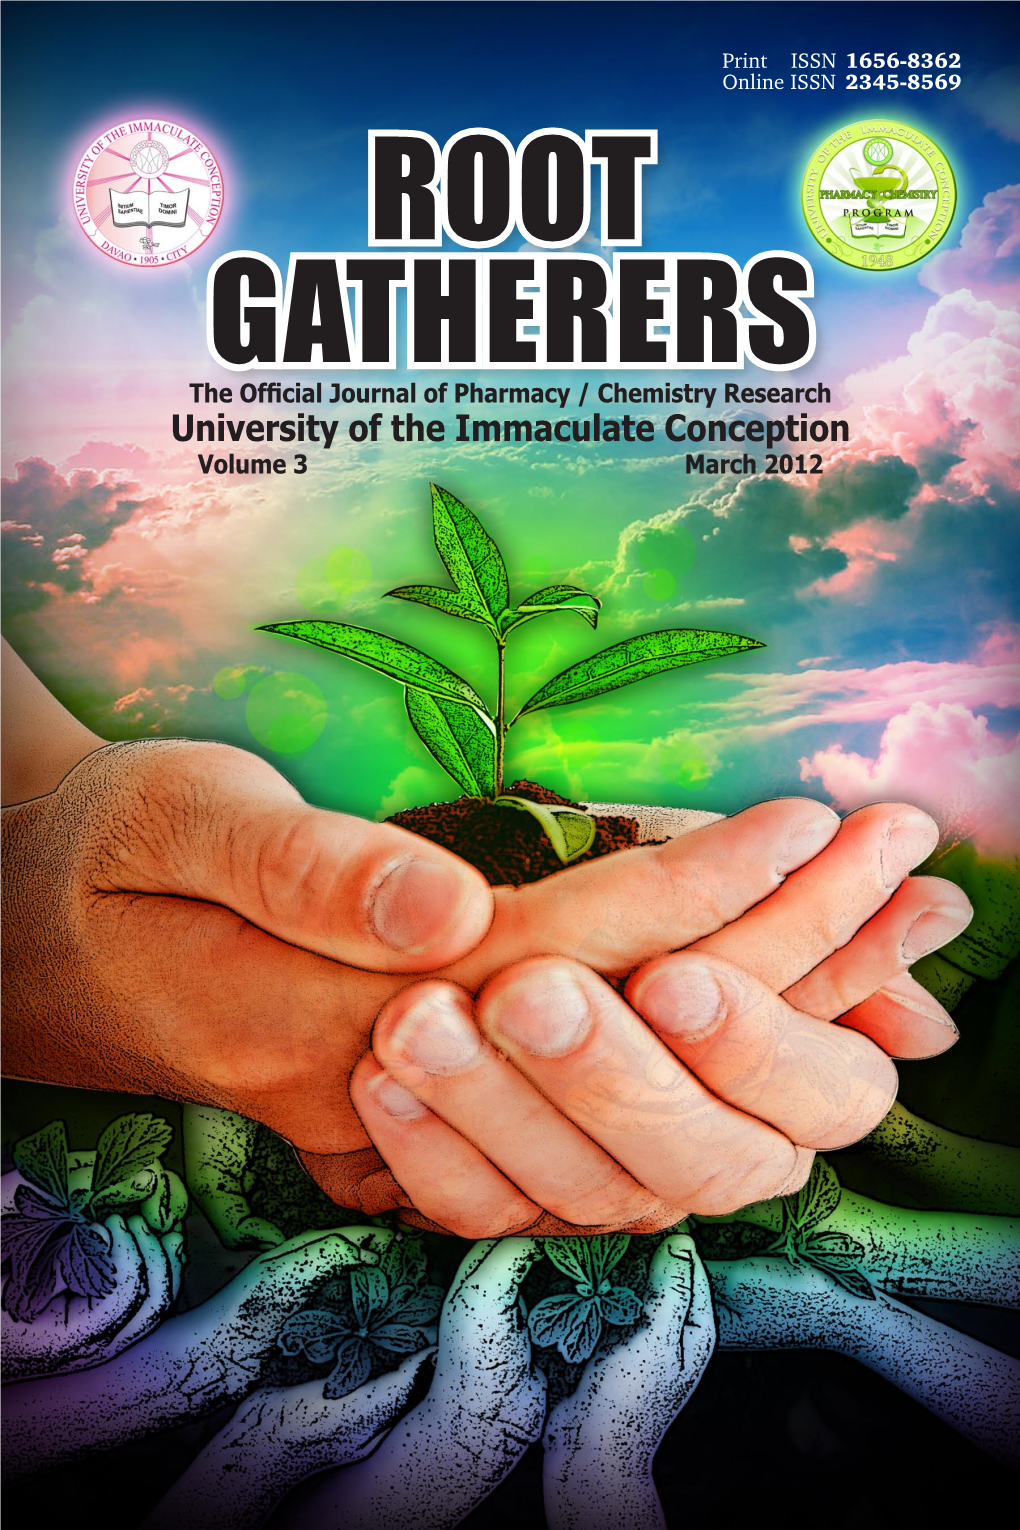 Root Gatherers the Official Journal of Pharmacy / Chemistry Research